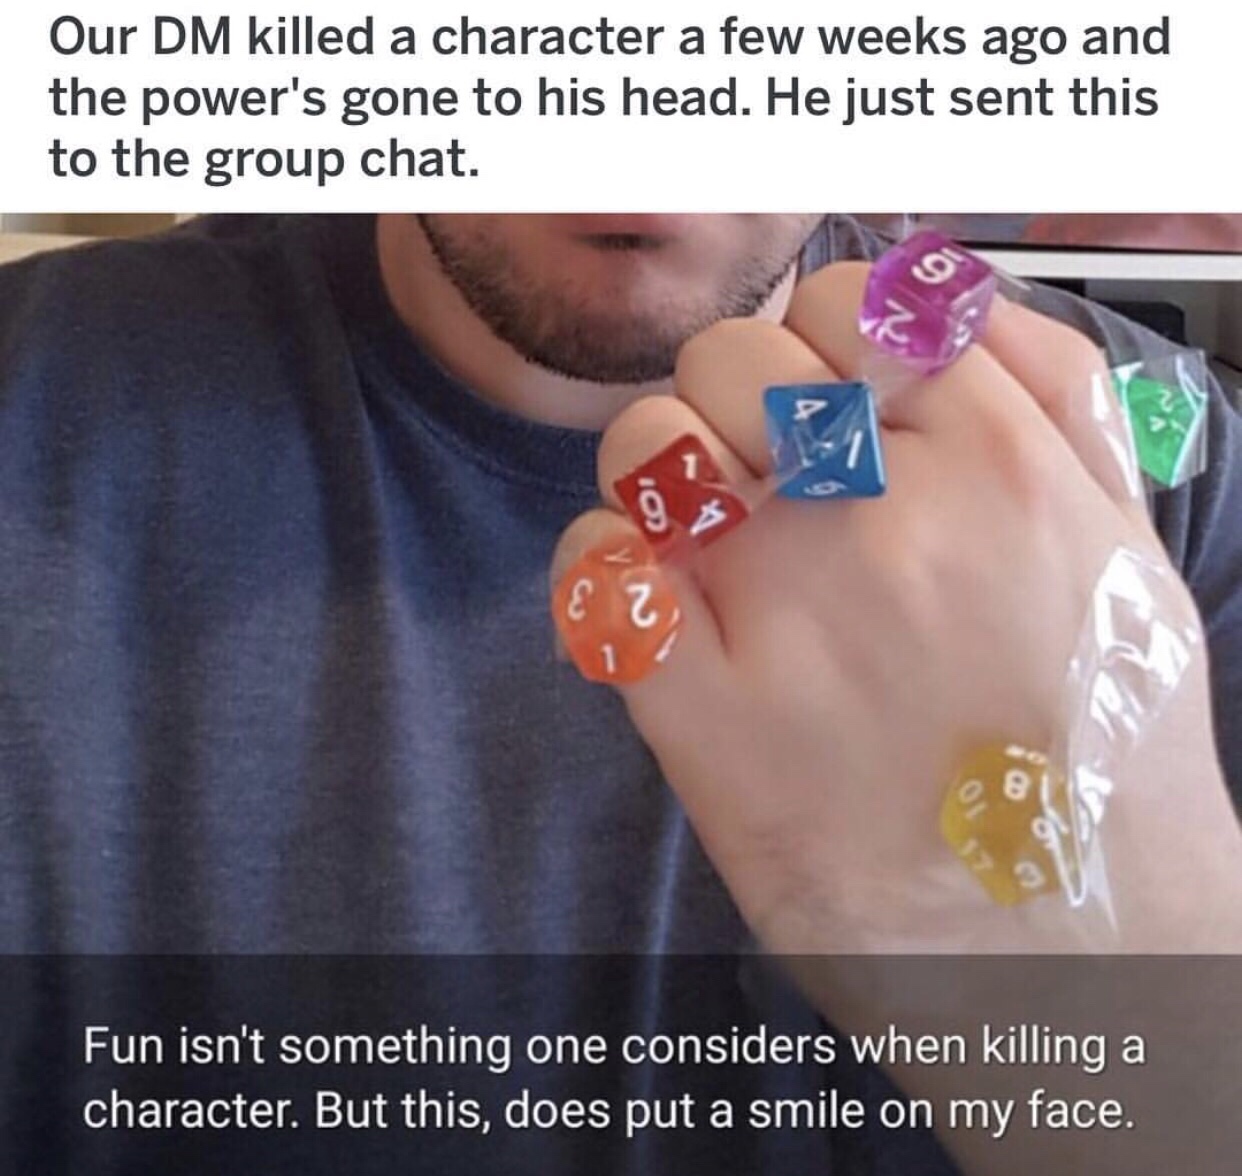 D&D meme - dnd dm memes - Our Dm killed a character a few weeks ago and the power's gone to his head. He just sent this to the group chat. 102 G Fun isn't something one considers when killing a character. But this, does put a smile on my face.